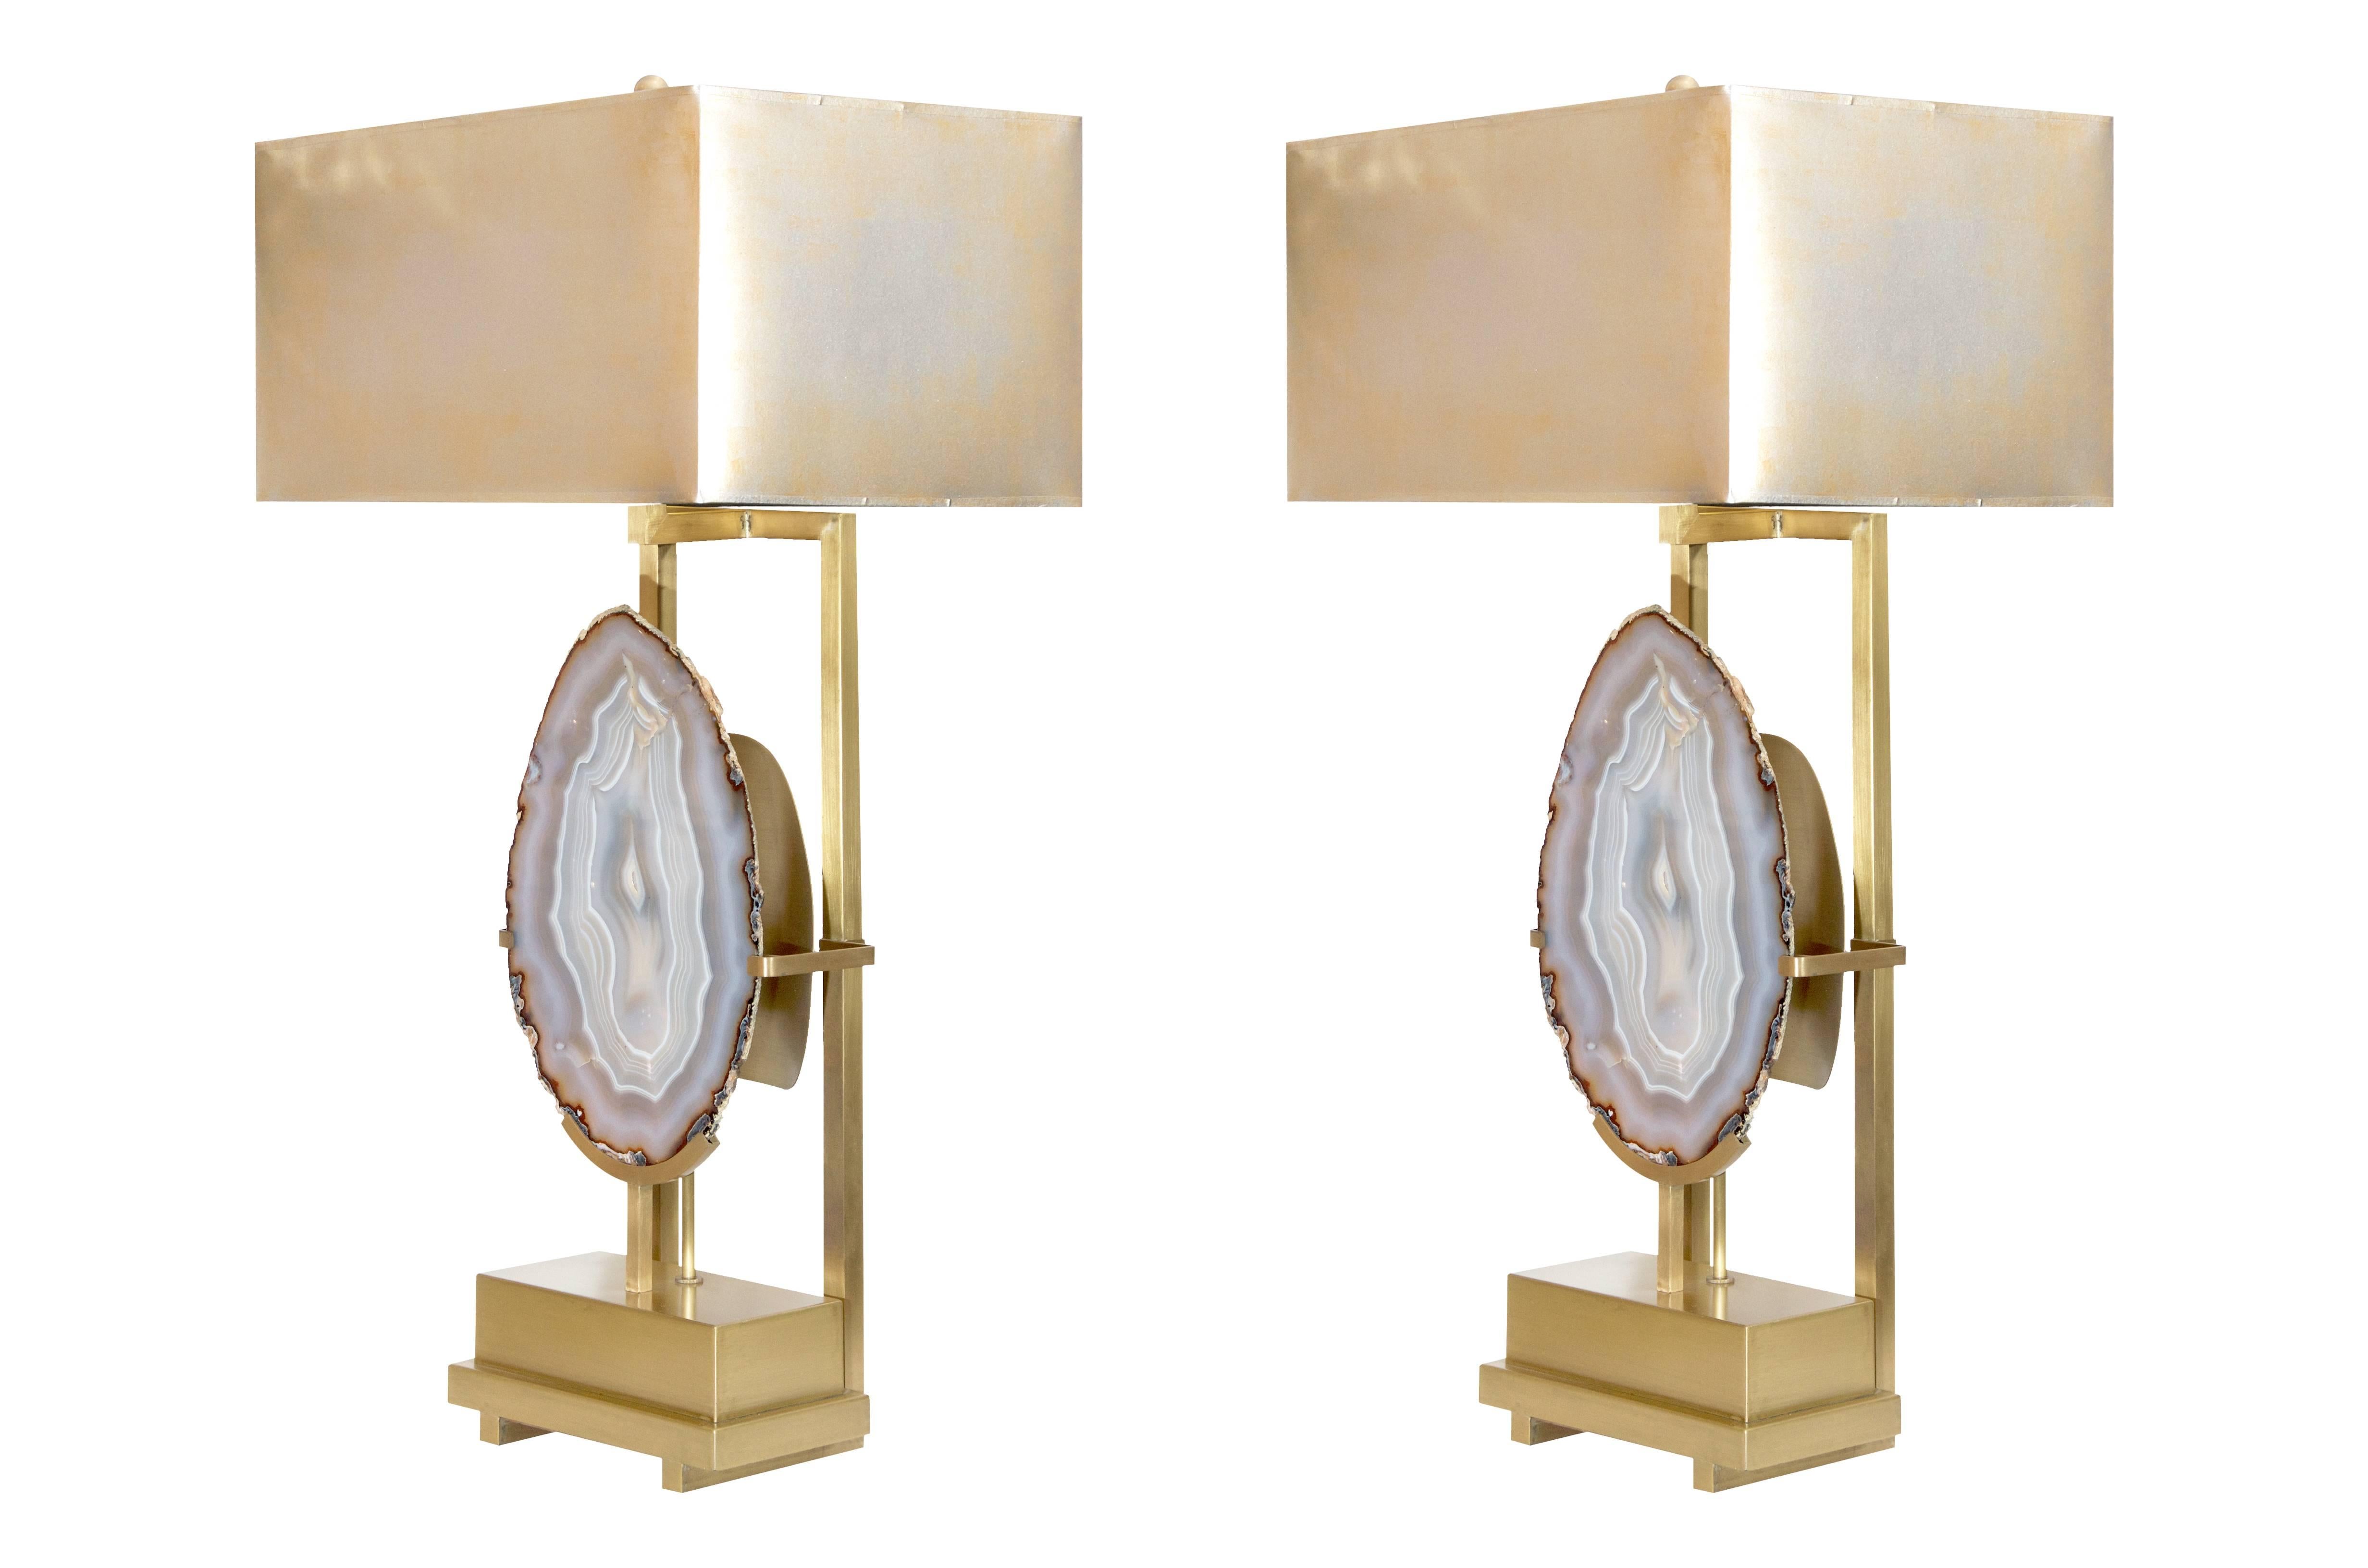 Impressive pair of custom designed lamps for the Modern Envy collection exclusively by On Madison featuring large slices of Brazilian agate set into brushed brass bases. custom-made metallic shades. 11-12 week production time.

With shade: 33.5h x